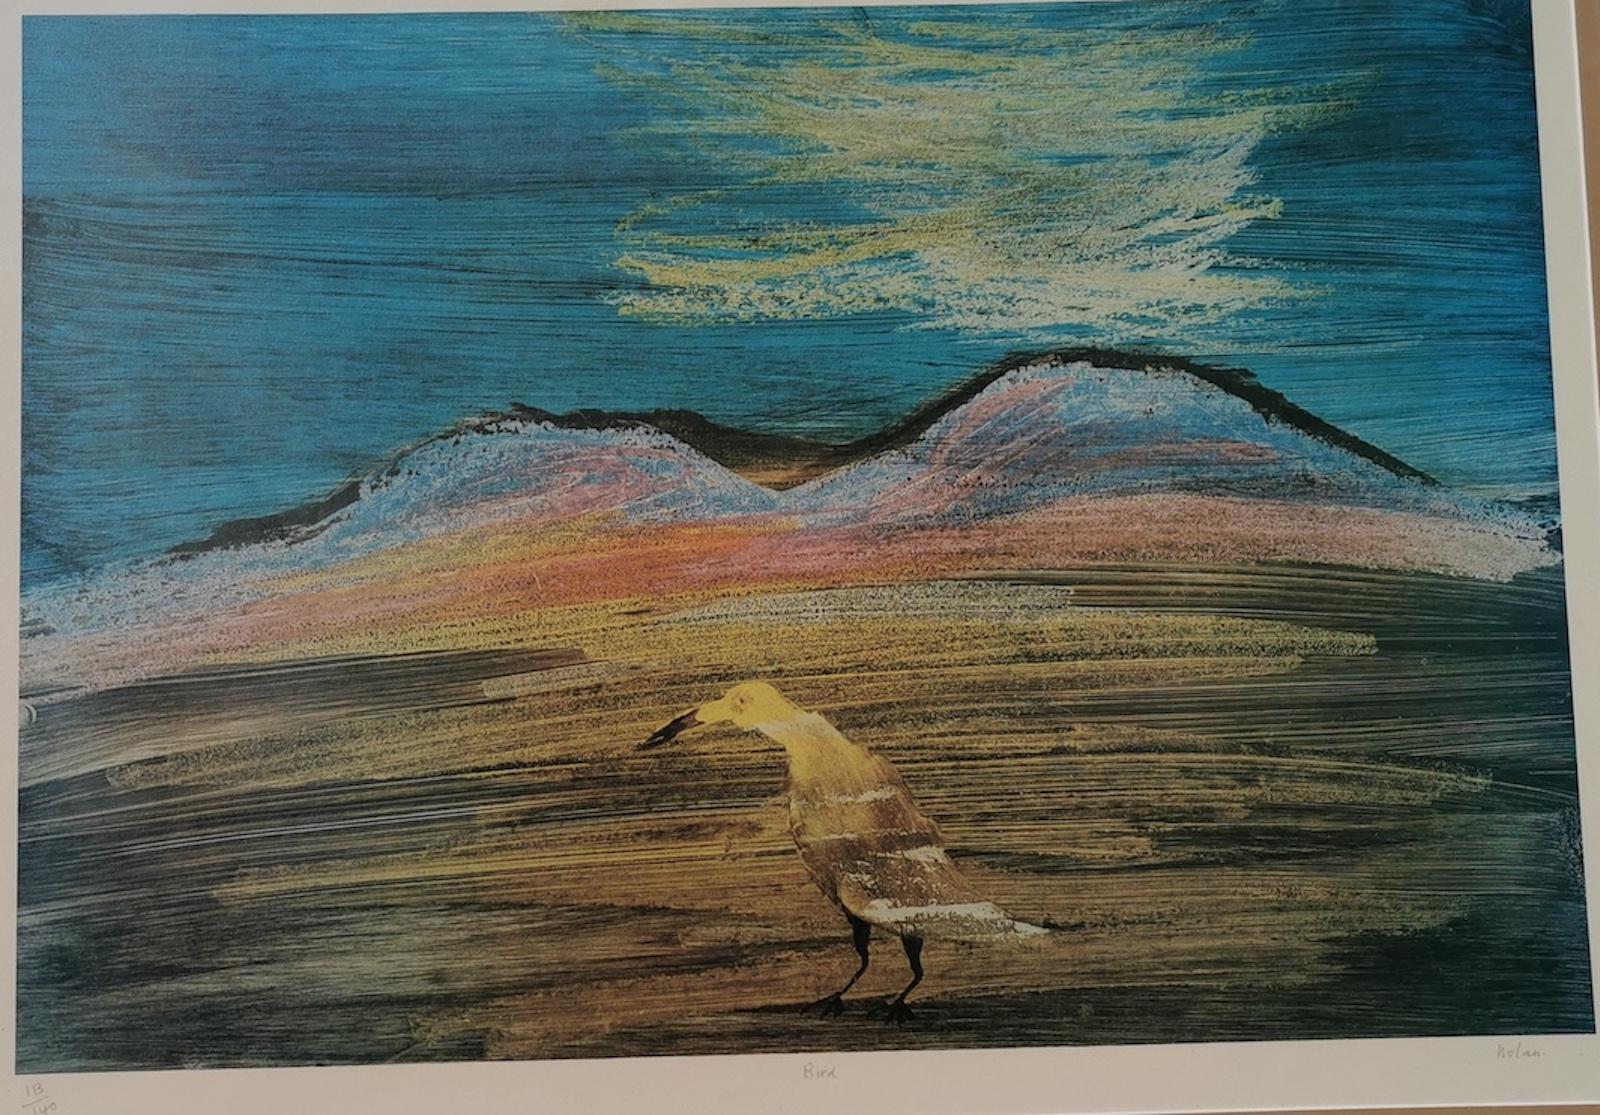 Australian artist Sidney Nolan (1917-1992), bird, limited edition photo lithograph,
113/140
signed bottom right,
image measures: 75 x 52, frame 110 x 89cm
Our eclectic stock crosses cultures, continents, styles and famous names.
Sir Sidney Robert